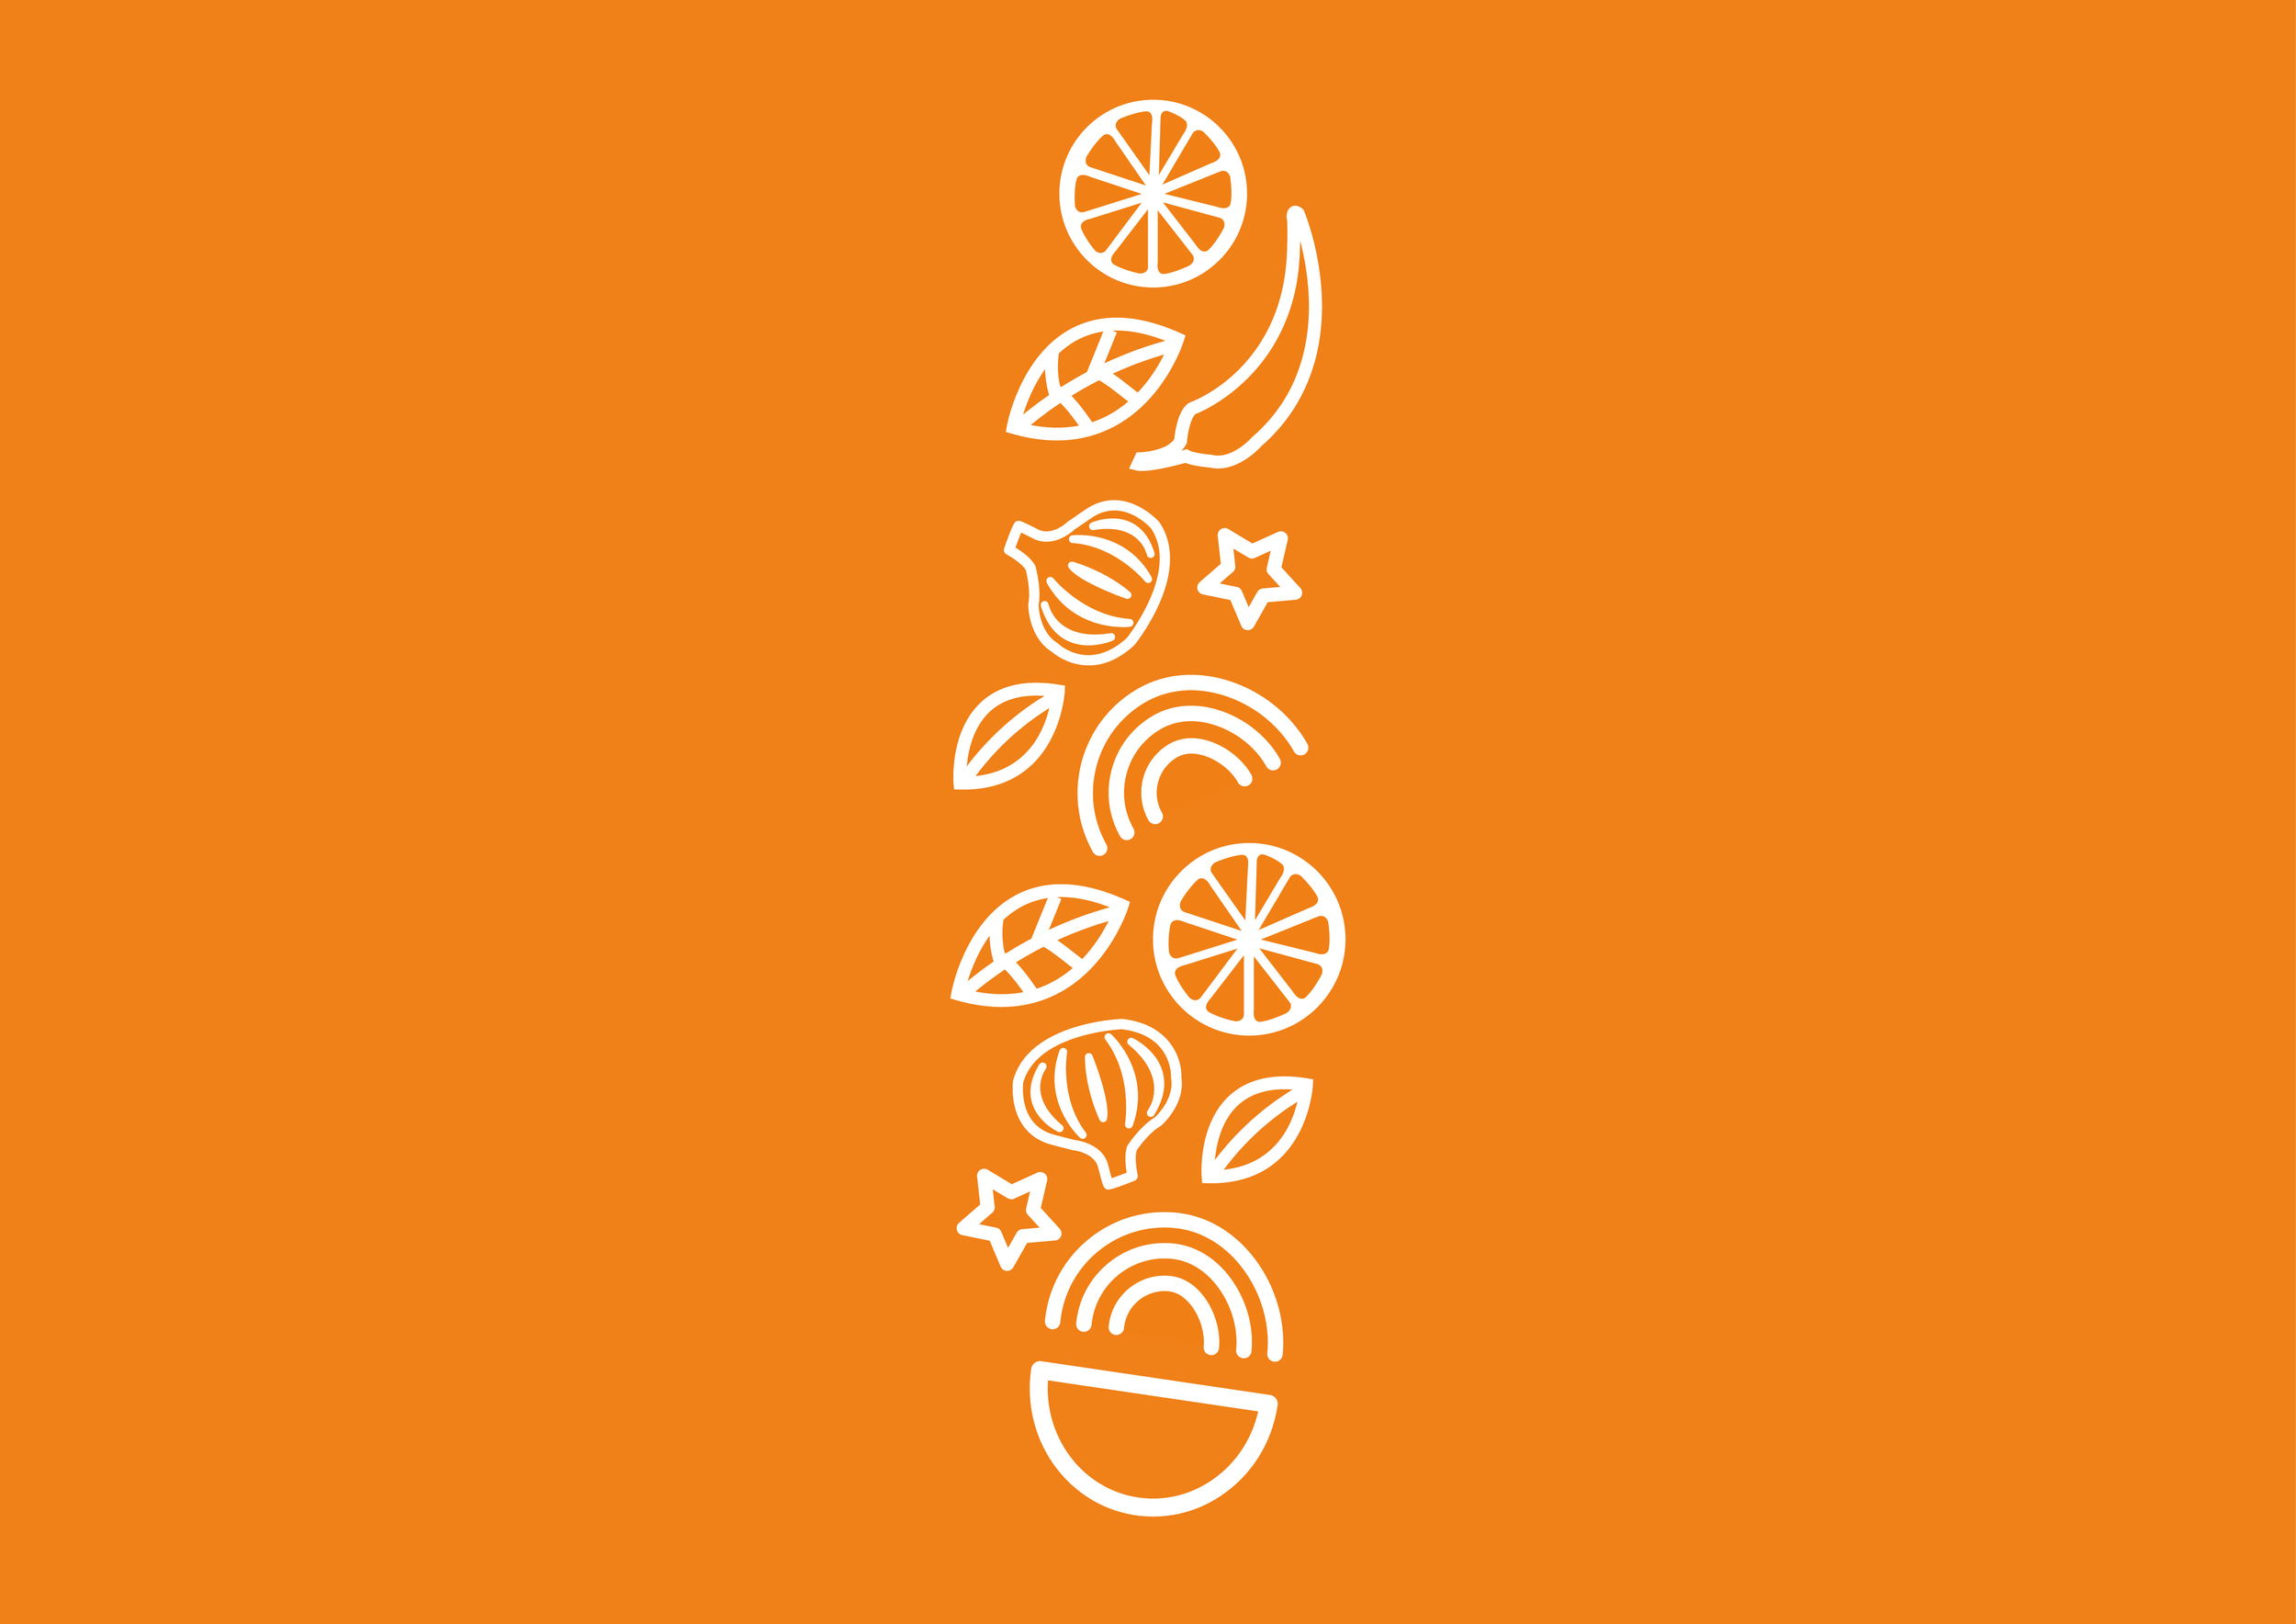 Graphic Design Company UK. Multiple food vector icons in orange background